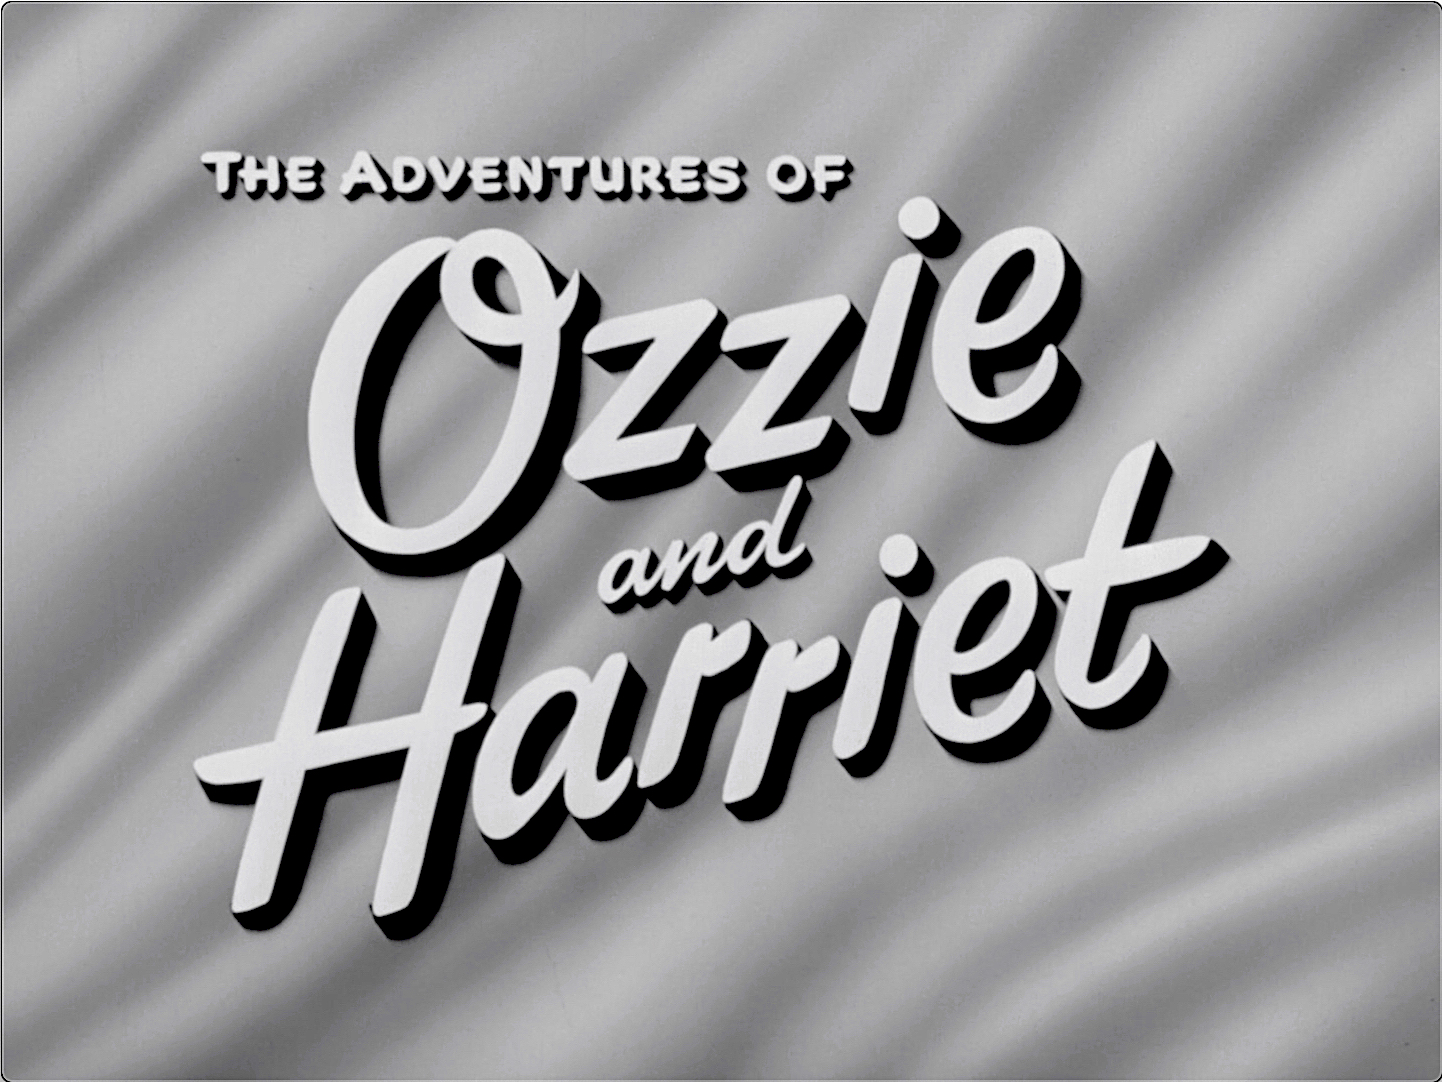 The Adventures of Ozzie and Harriet S09E13 Piano for the Fraternity (Dec.21.1960)-1.jpg